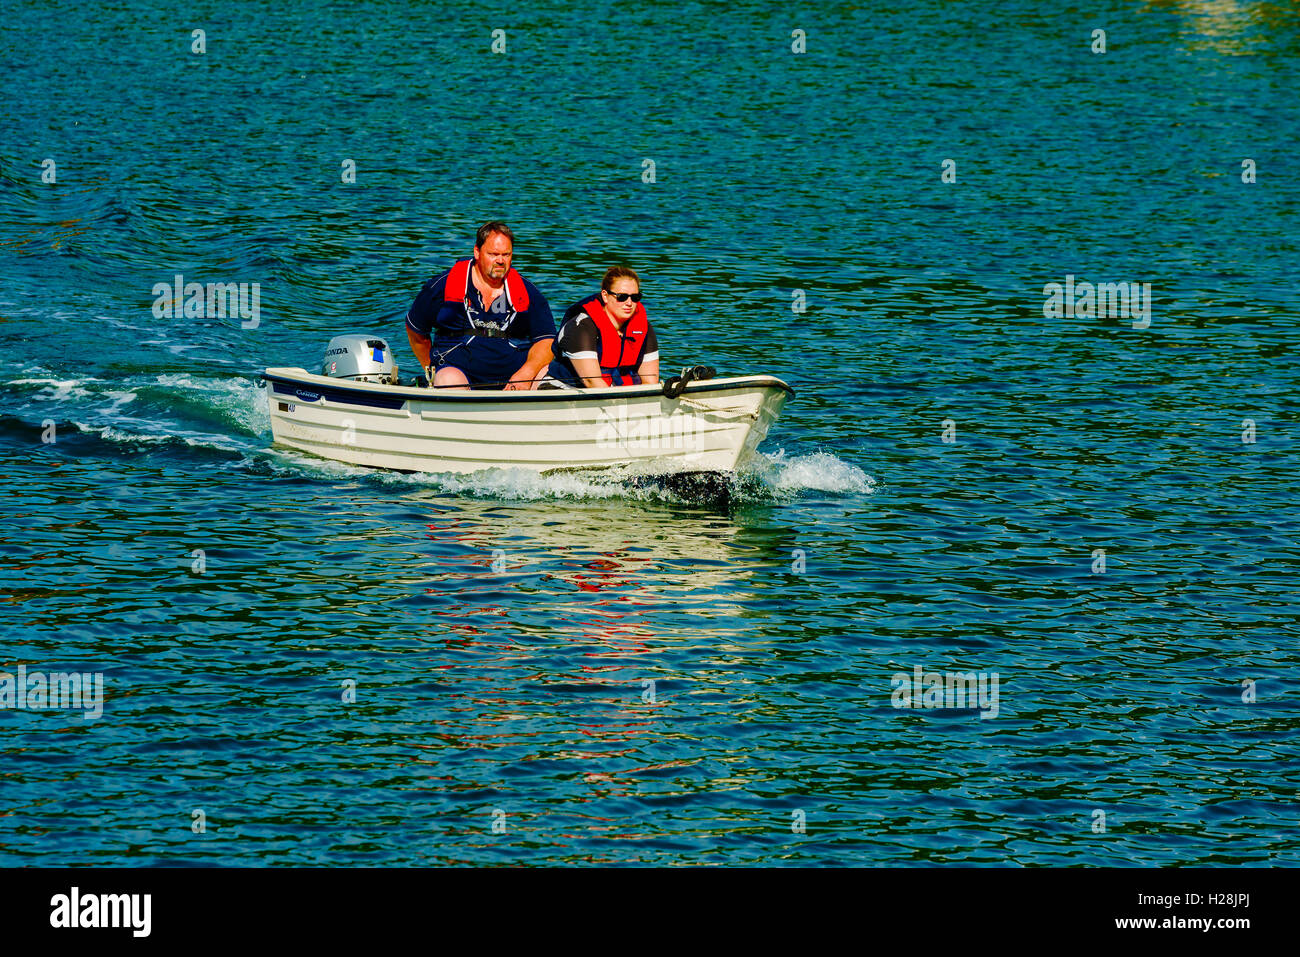 Askeron, Sweden - September 9, 2016: Environmental documentary of adult couple traveling in small open motorboat. Stock Photo